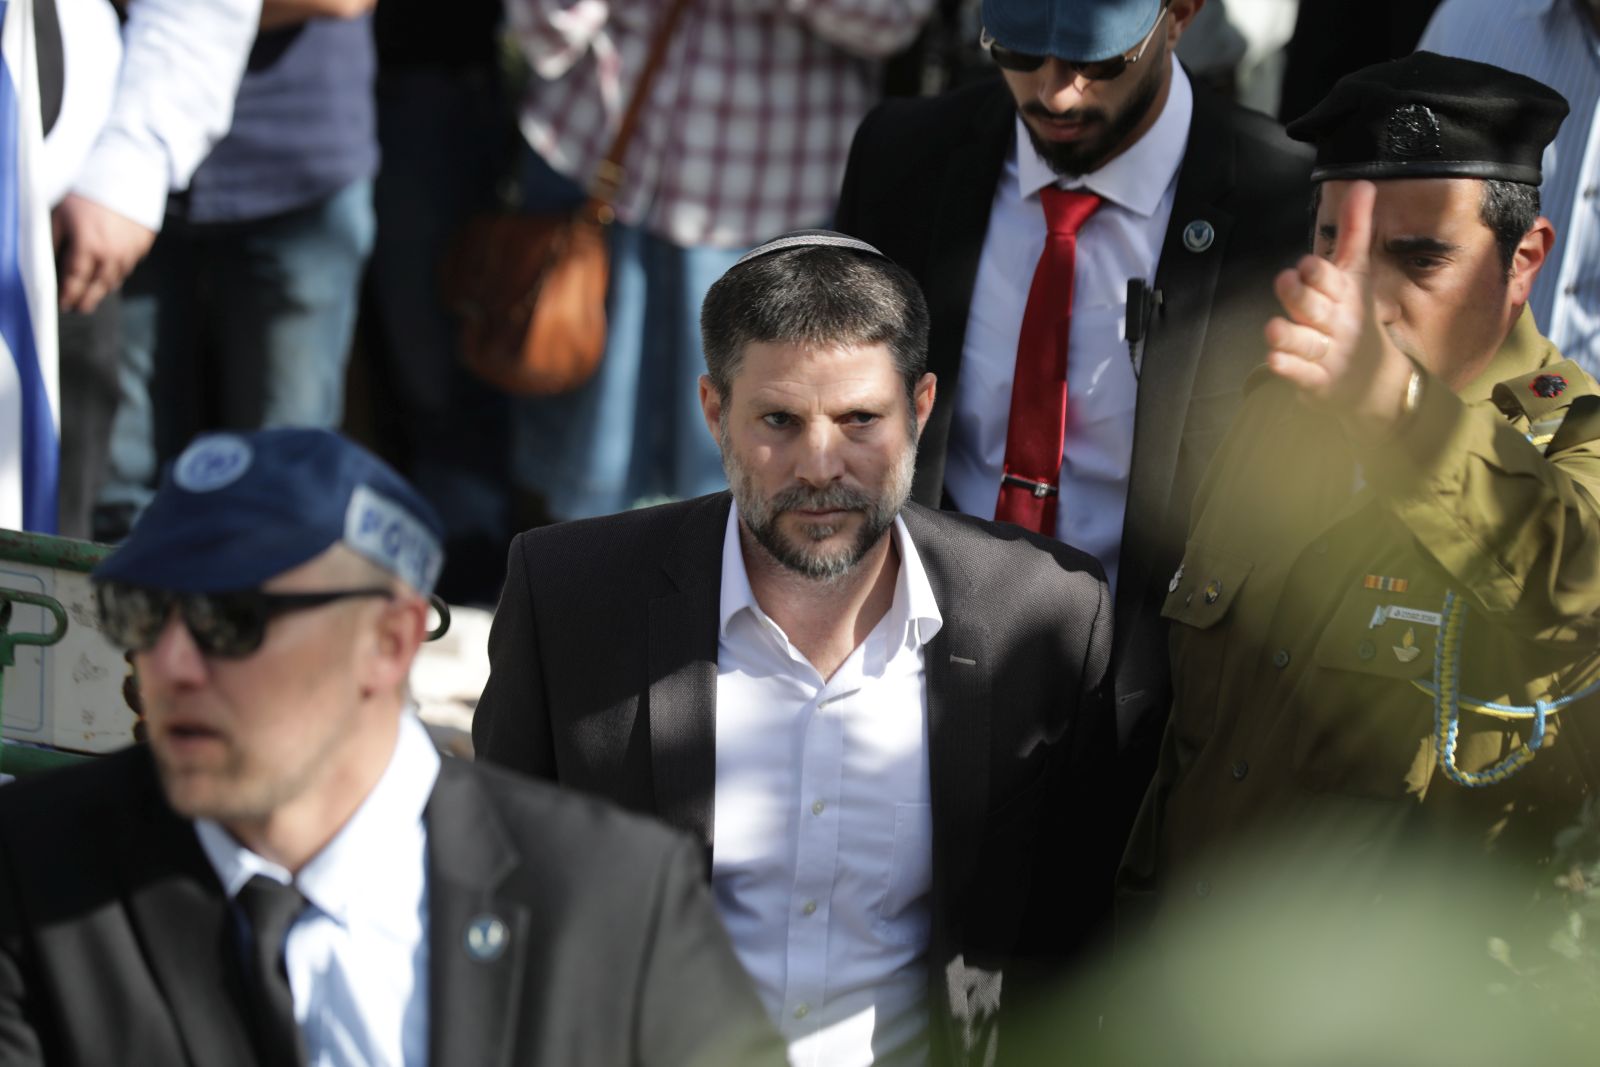 epa10493694 Israeli Finance Minister Bezalel Smotrich attends the funeral of two Israeli brothers Hillel and Yagel Yaniv at the Mount Herzl military cemetery in Jerusalem, 27 February 2023. Hillel and Yagel Yaniv were shot dead by a Palestinian driver on 26 February, as Israeli authorities said, near the Palestinian village of Hawara close to the city of Nablus in the West Bank.  EPA/ABIR SULTAN